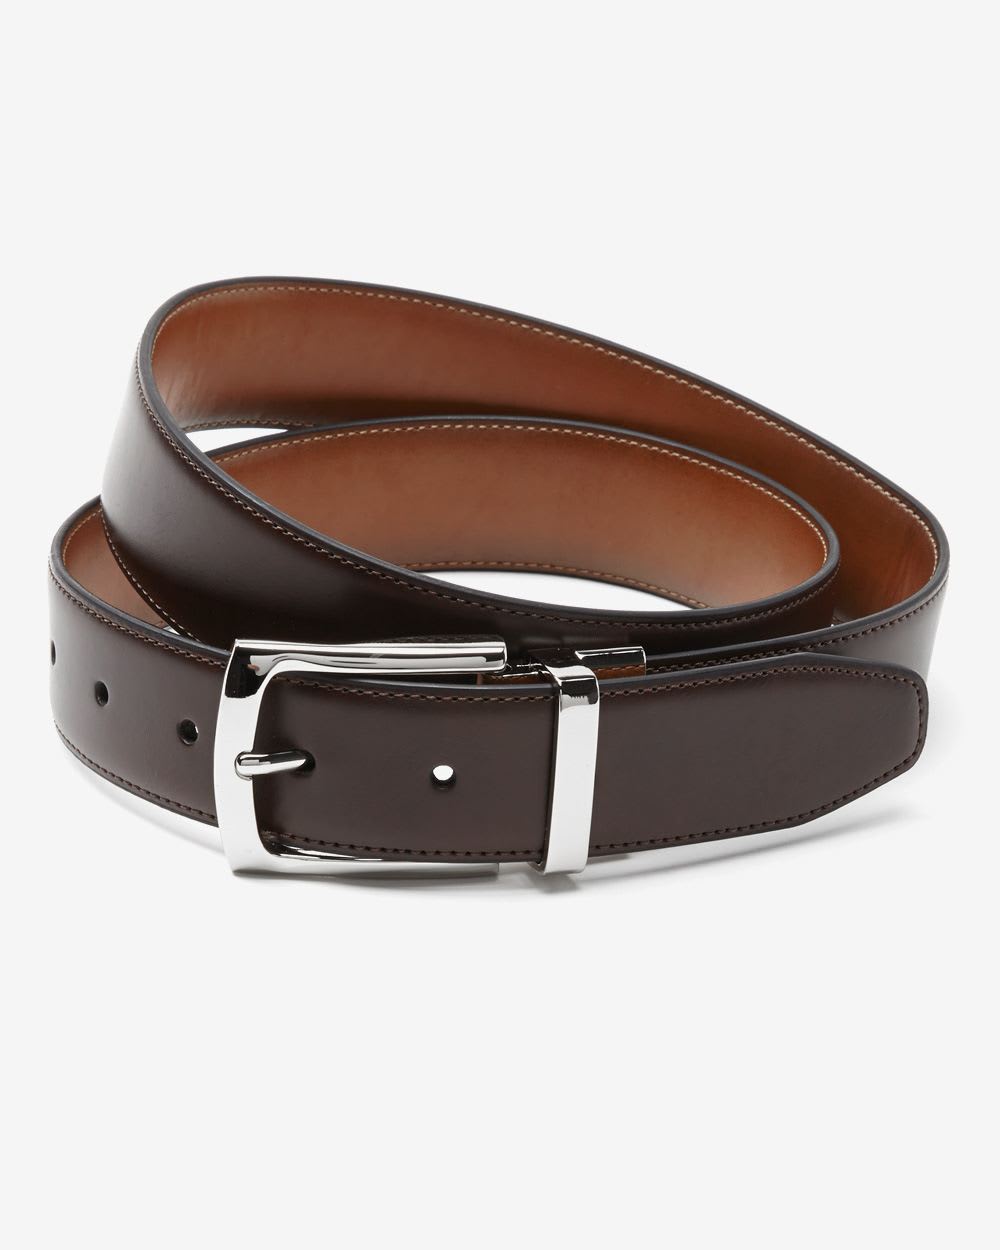 Reversible Brown Leather Belt | RW&CO.